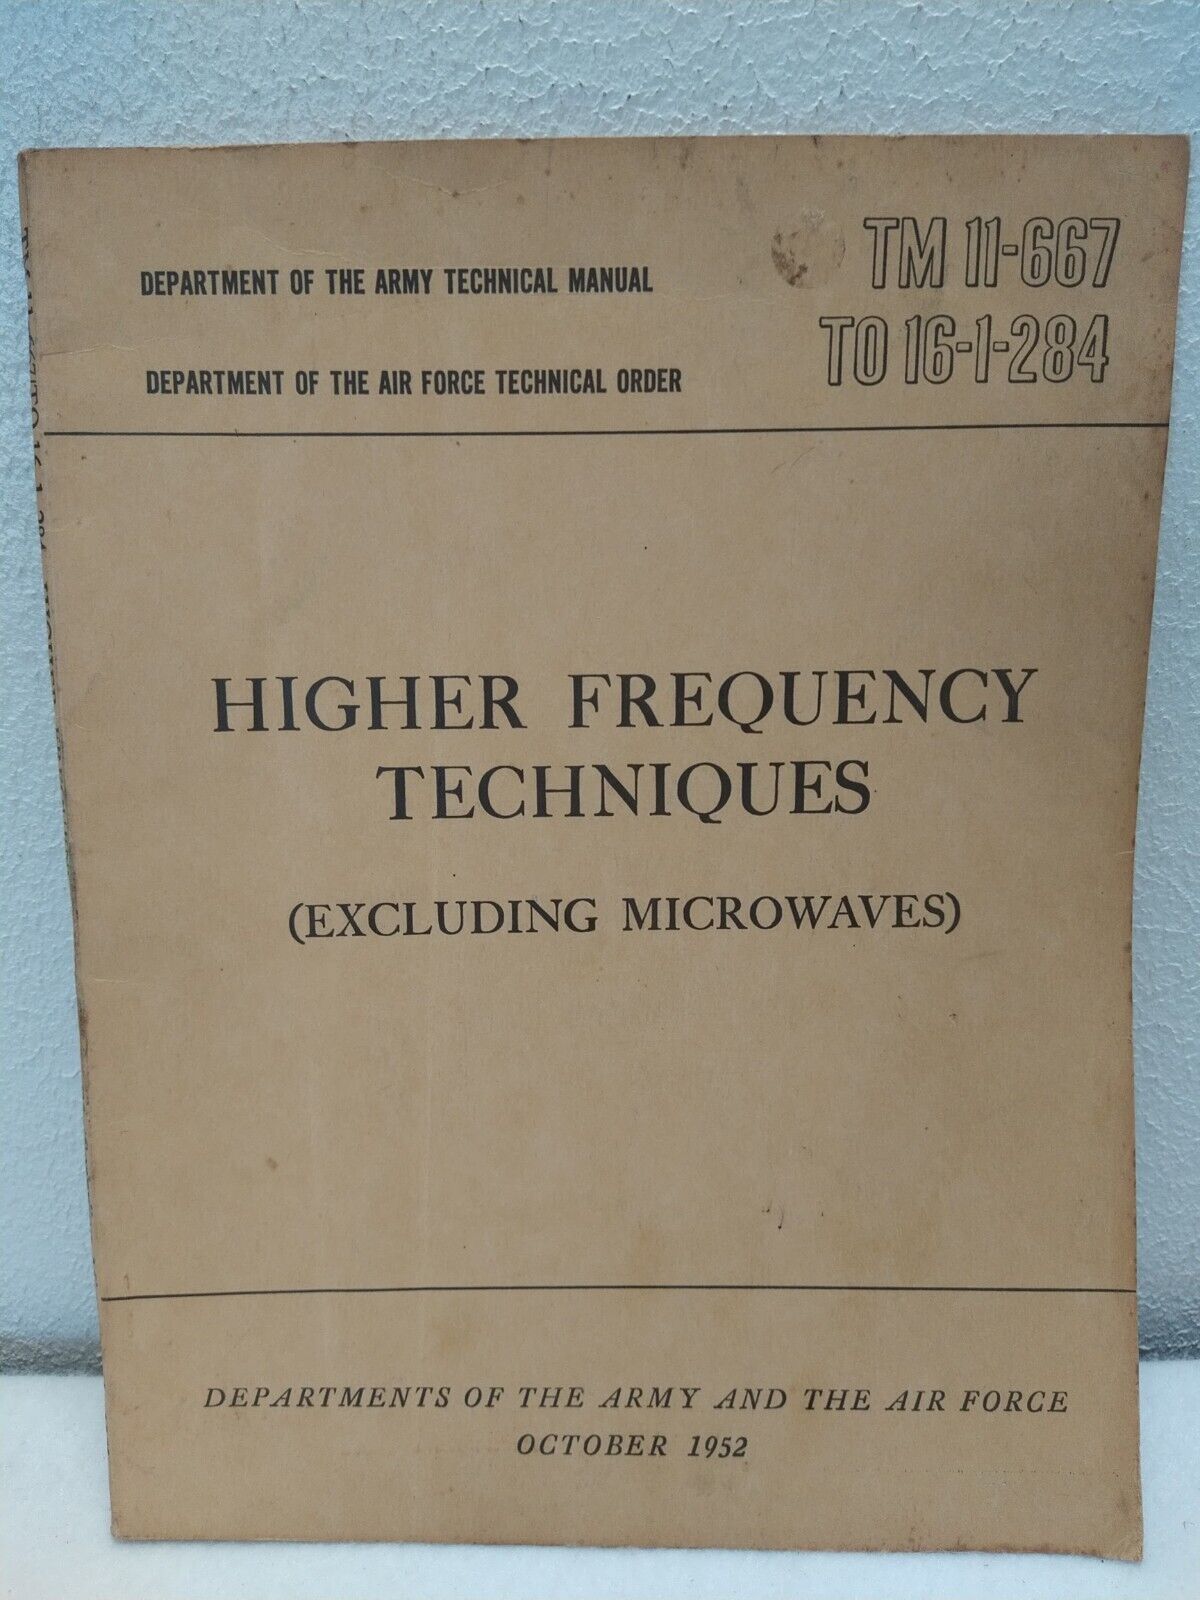 1952 Army Higher Frequency Techniques Excluding Microwaves TM 11-667 to 16-1-284